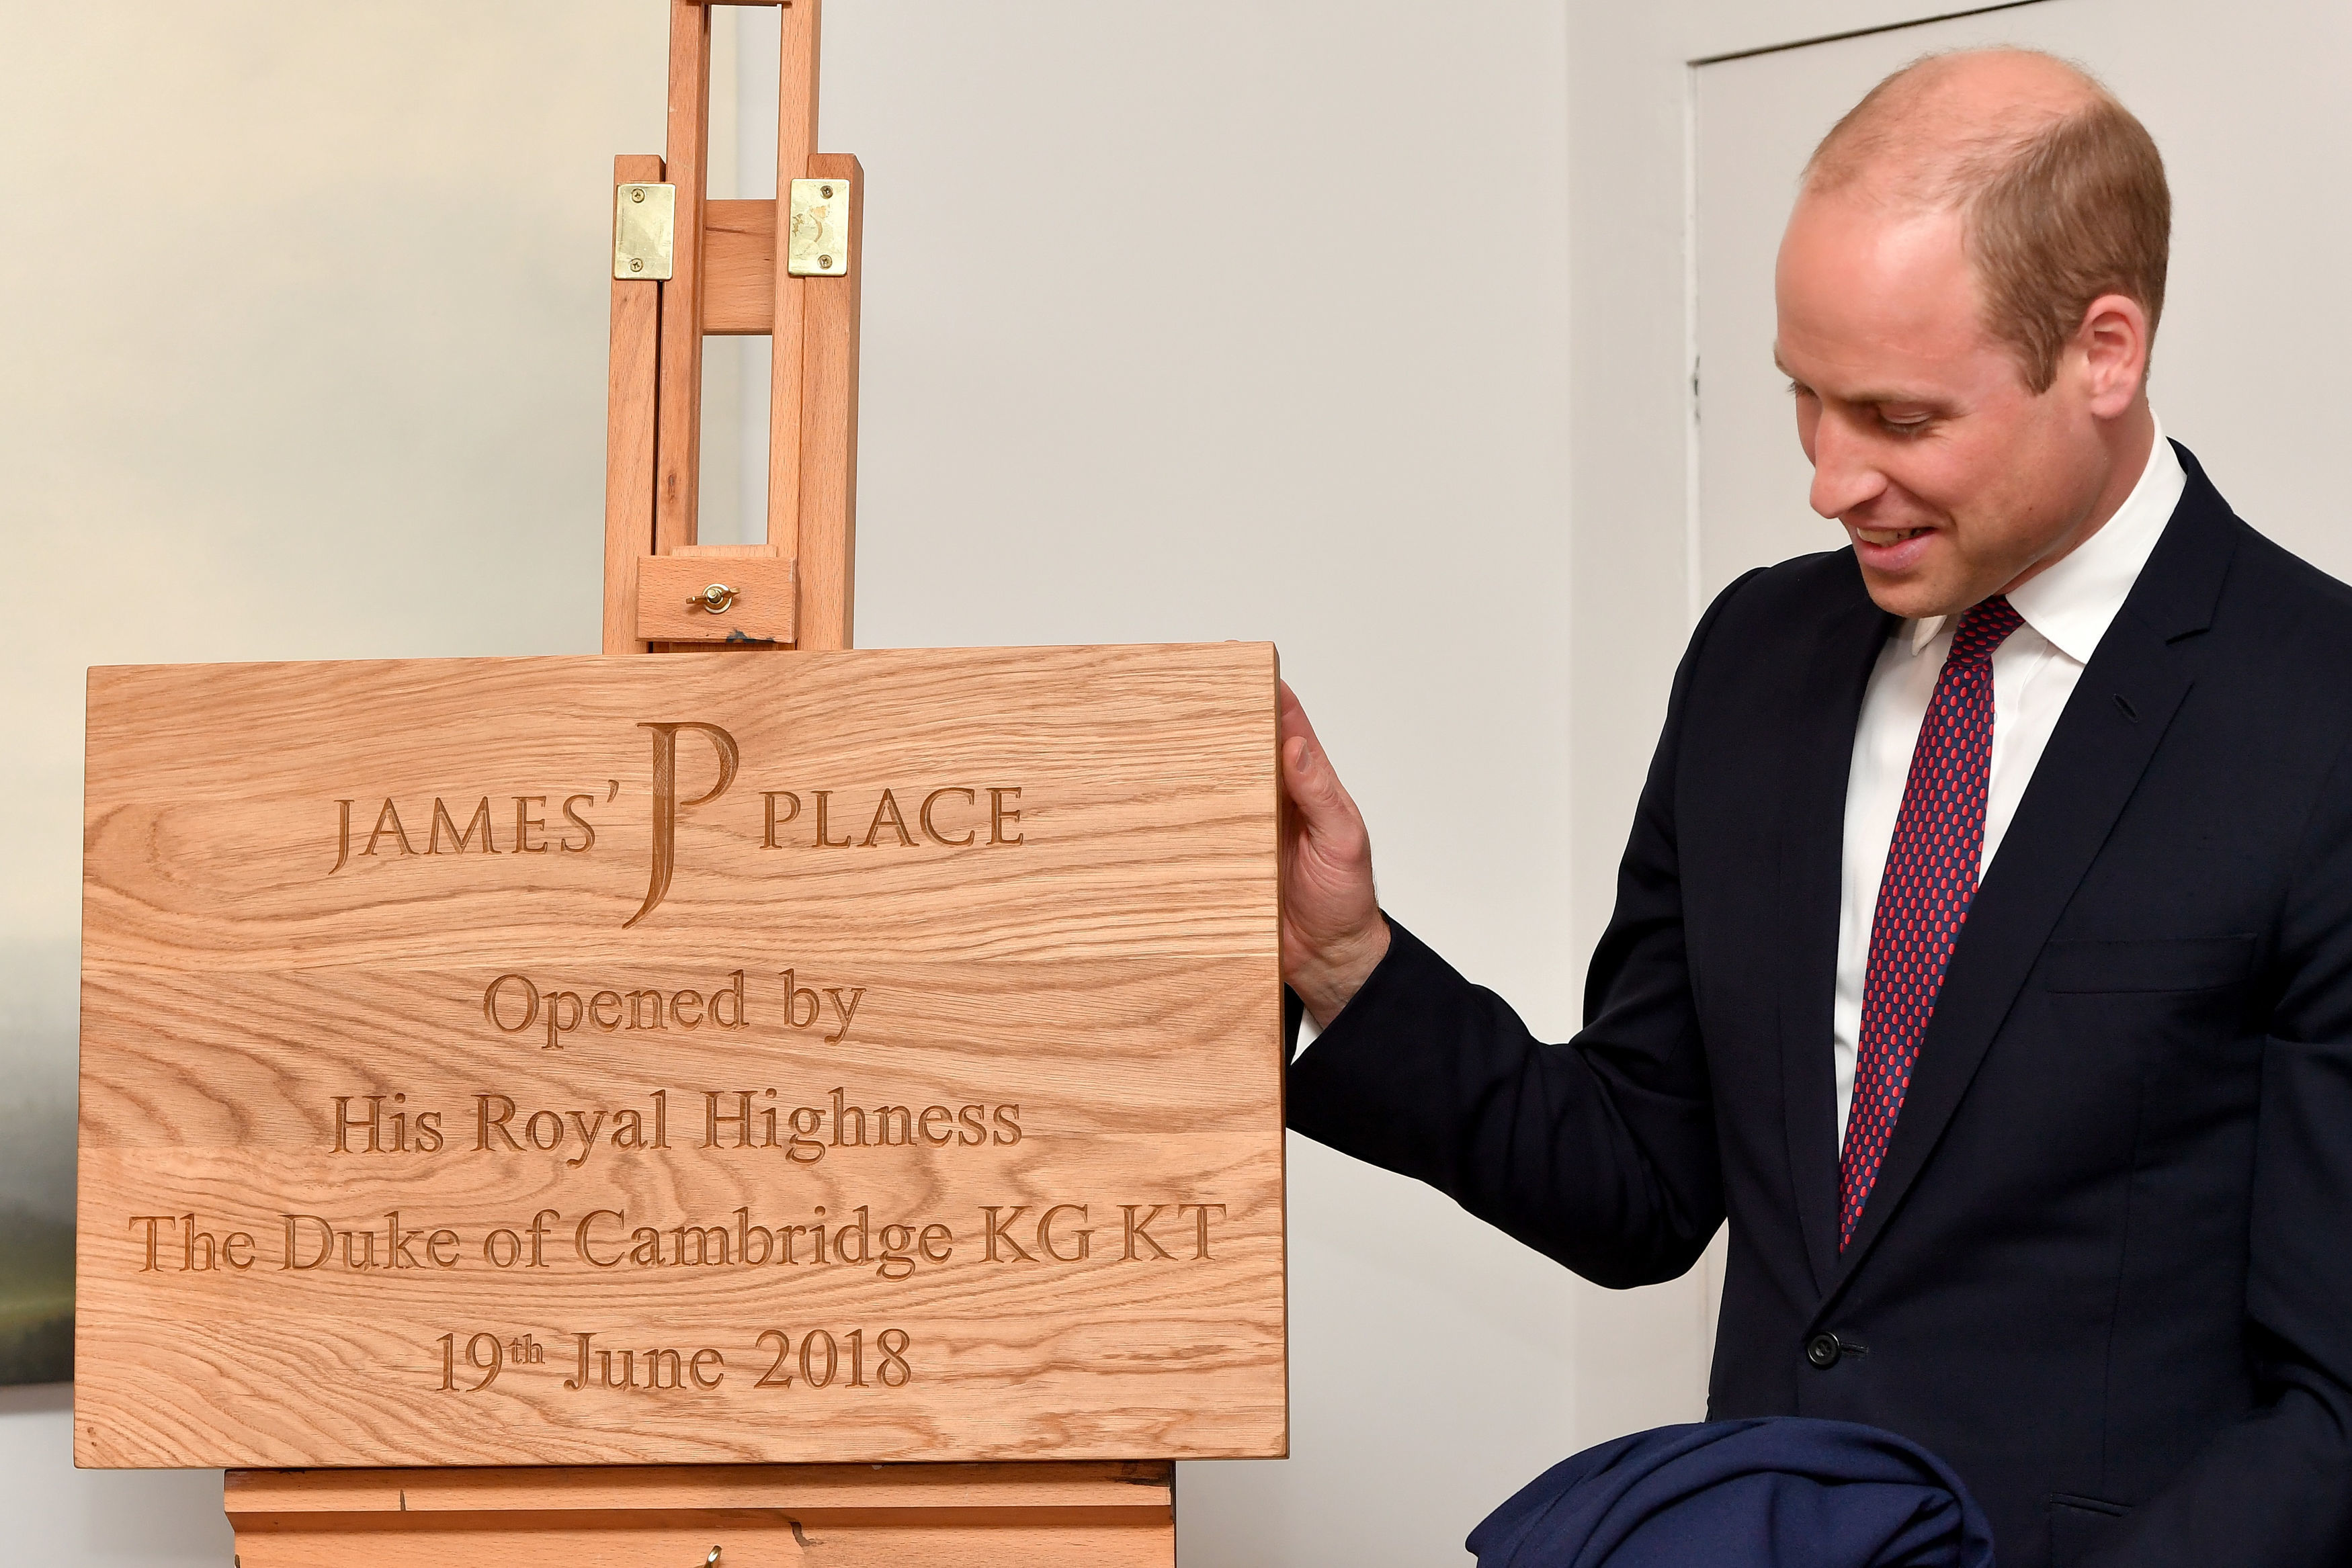 William unveils a plaque during a visit to James' Place in Liverpool 